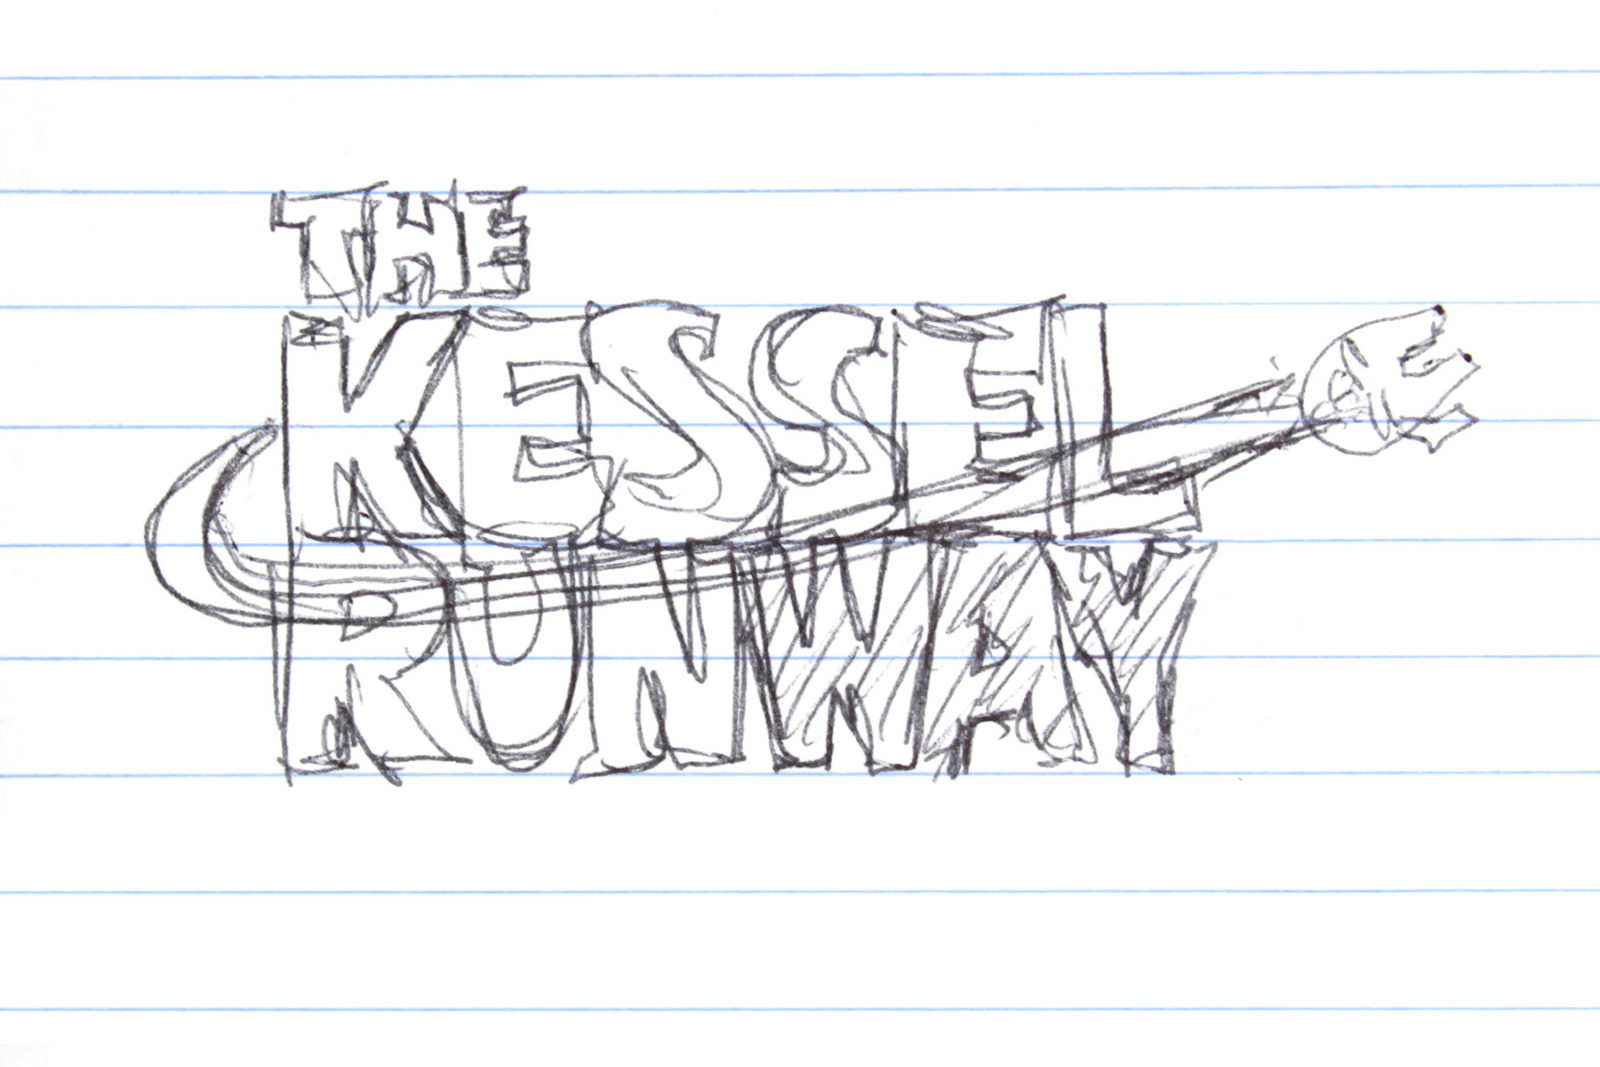 The Kessel Runway - Four Years Ago Today